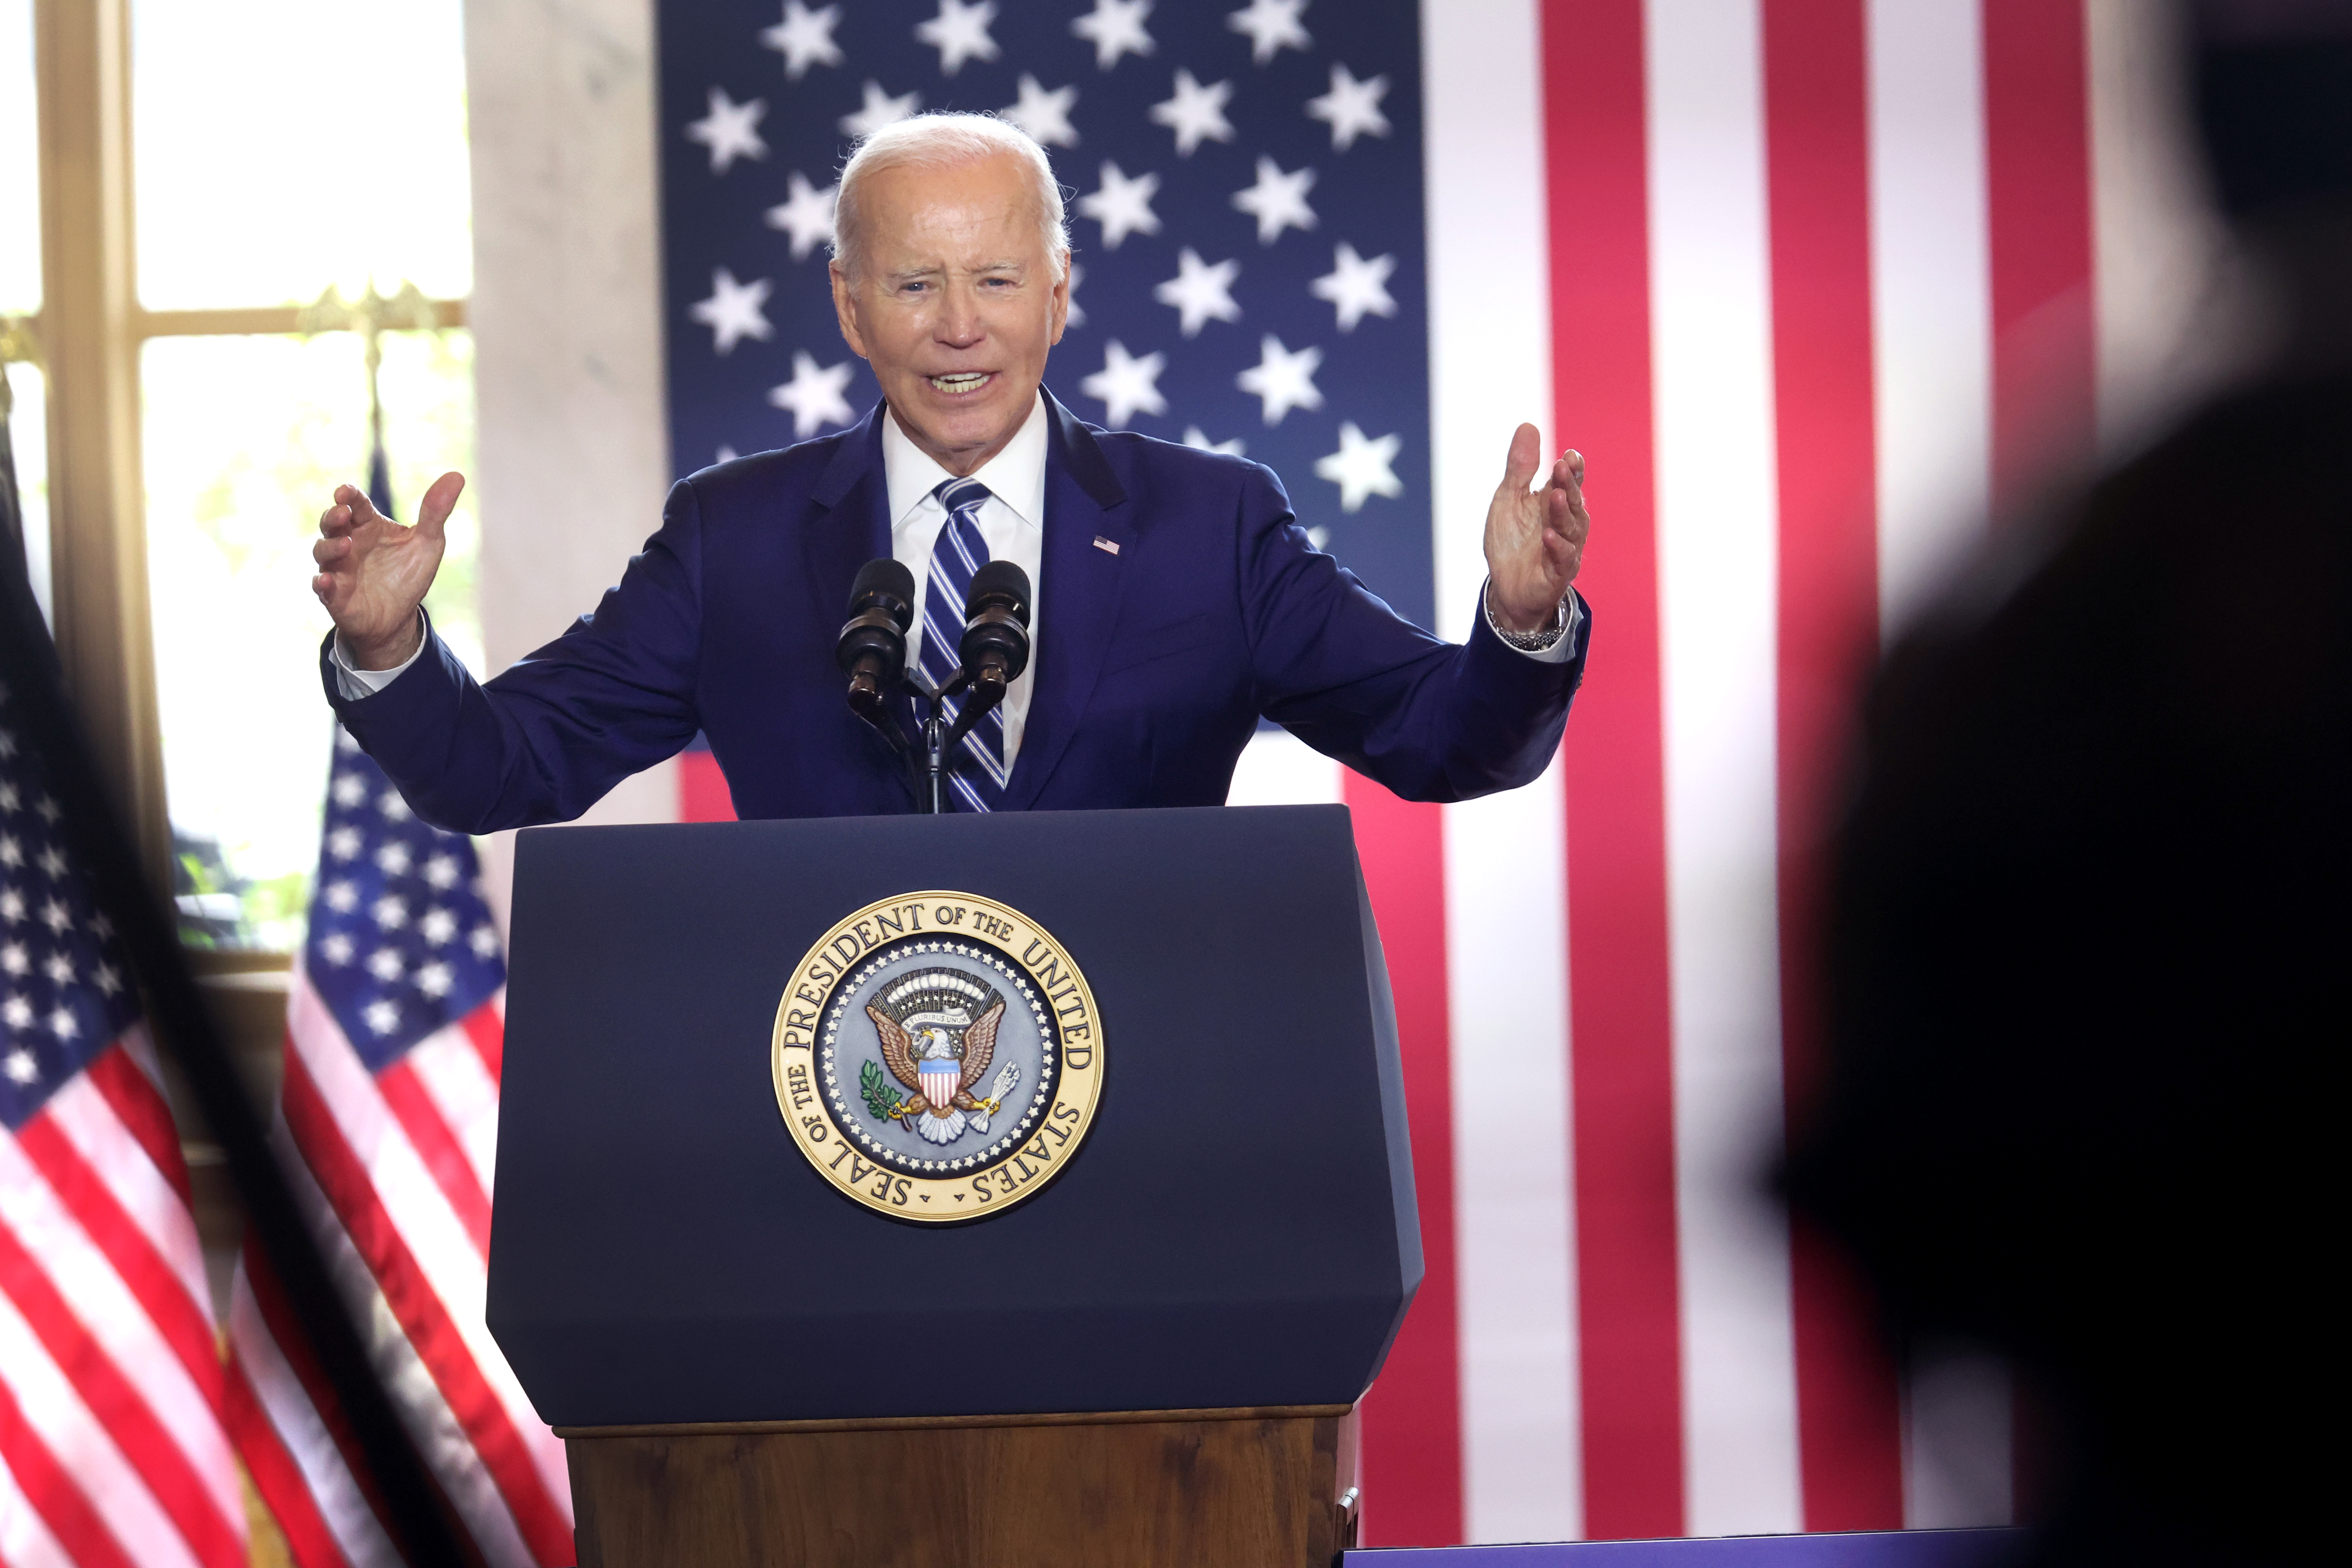 Biden unveiled his economic plan during an event at the old post office building in Chicago, Illinois.